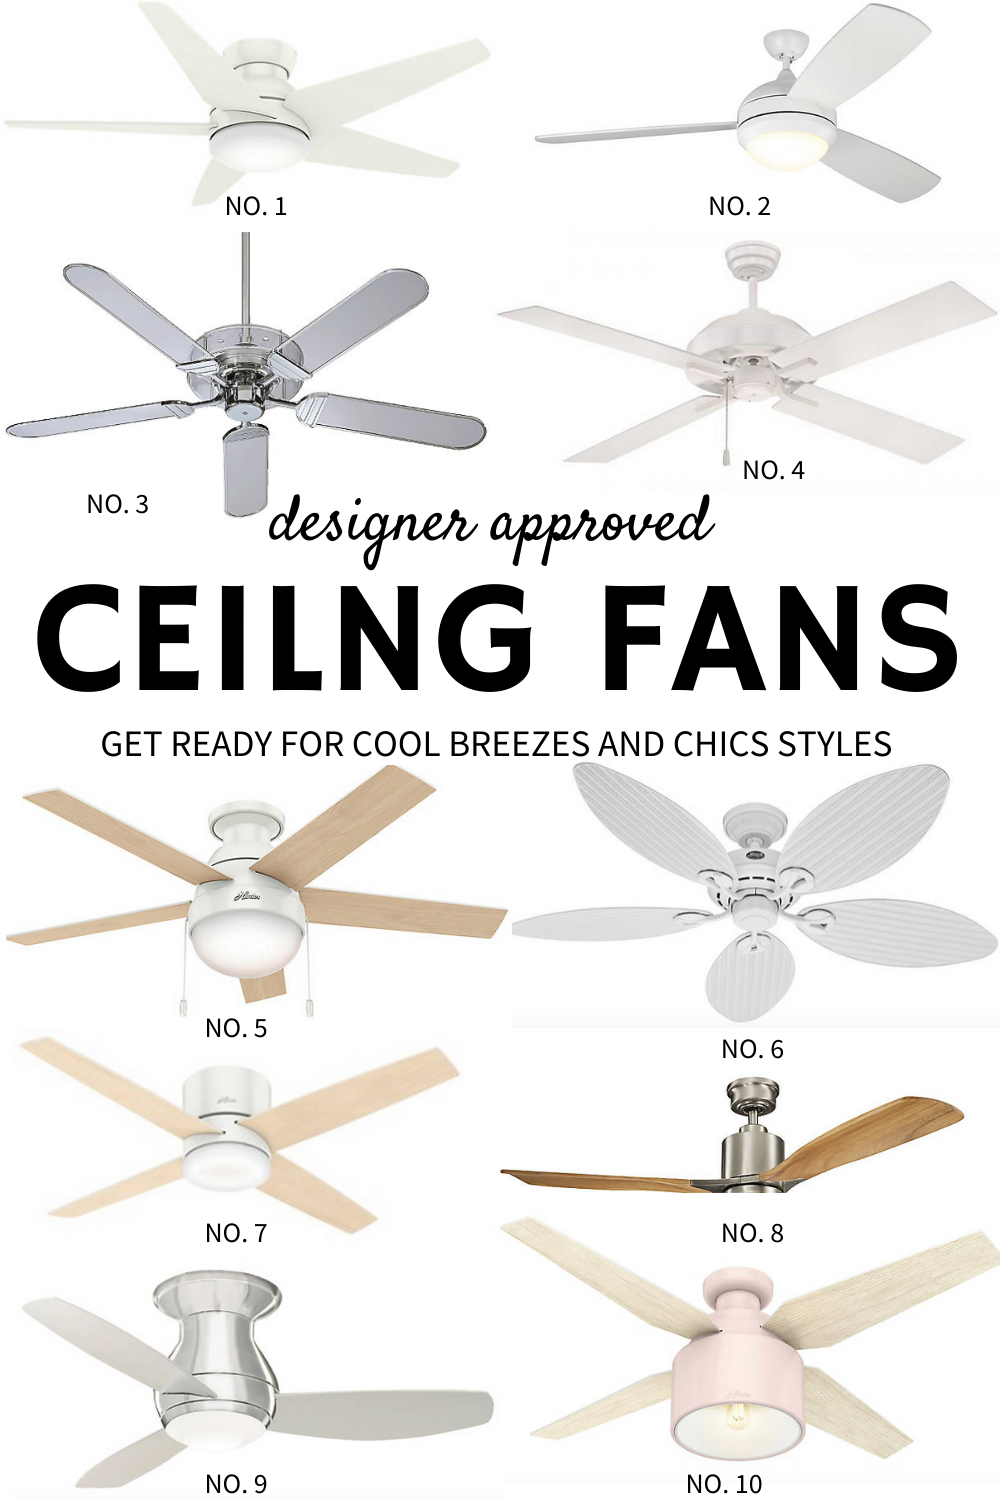 Ceiling Fan: When & How to Use Them